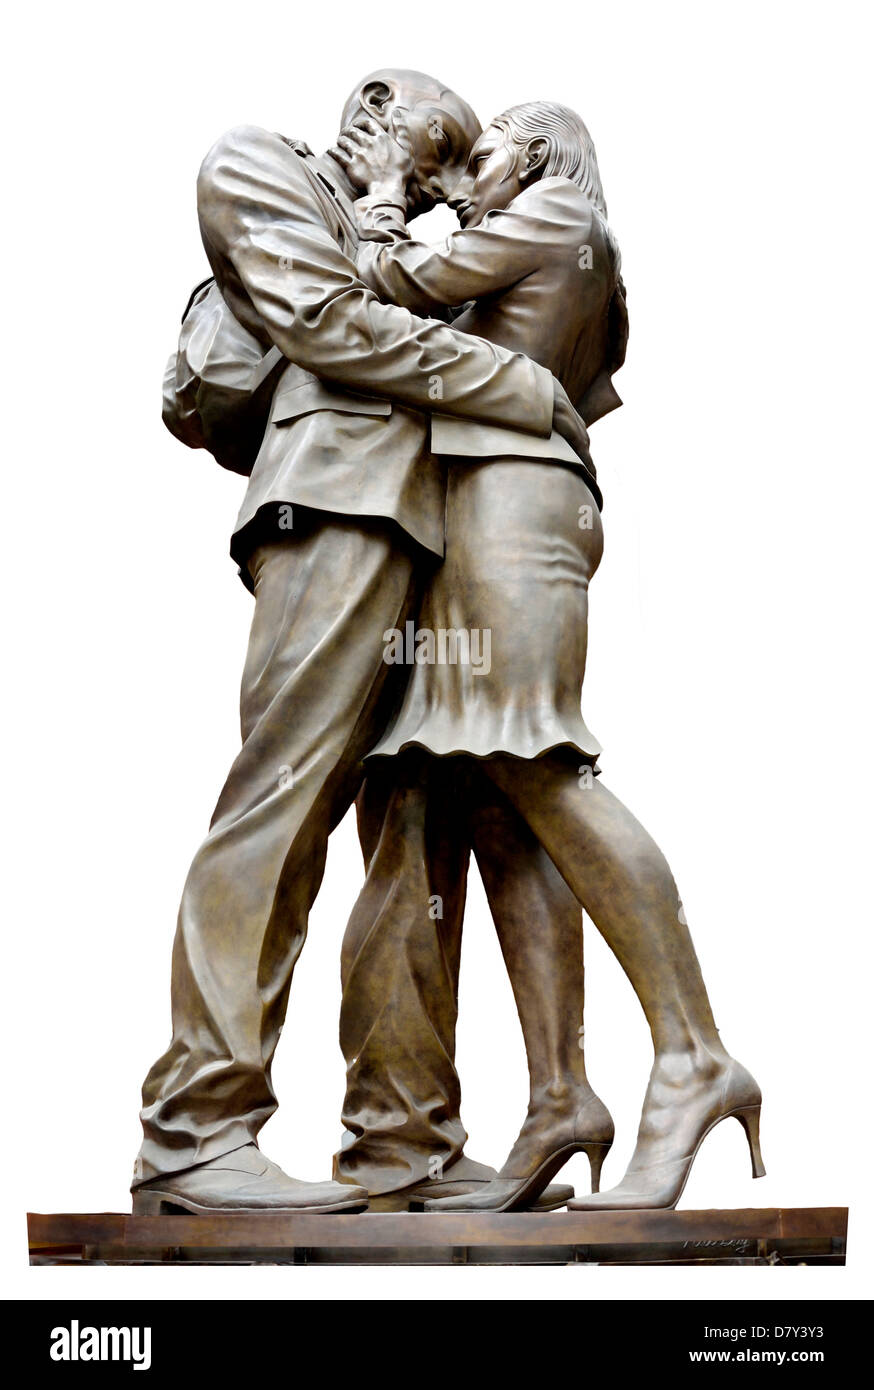 London, England, UK. St Pancras Railway Station. 9m high sculpture 'The Meeting Place' (Paul Day) Stock Photo